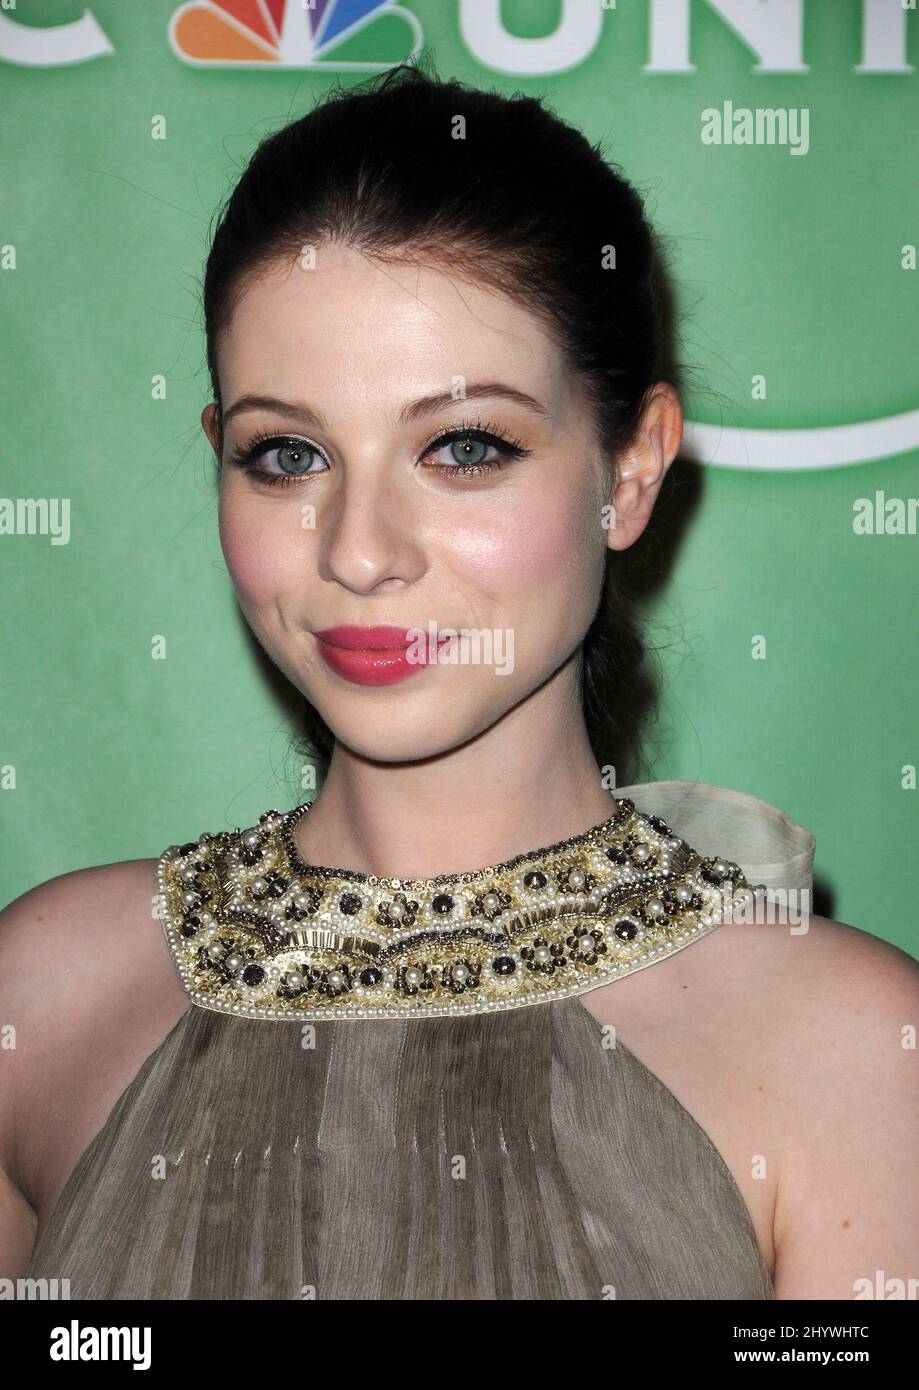 Michelle Trachtenberg at the NBC Summer Press Tour 2009, held at the Langham Huntington Hotel & Spa, Pasadena. Stock Photo